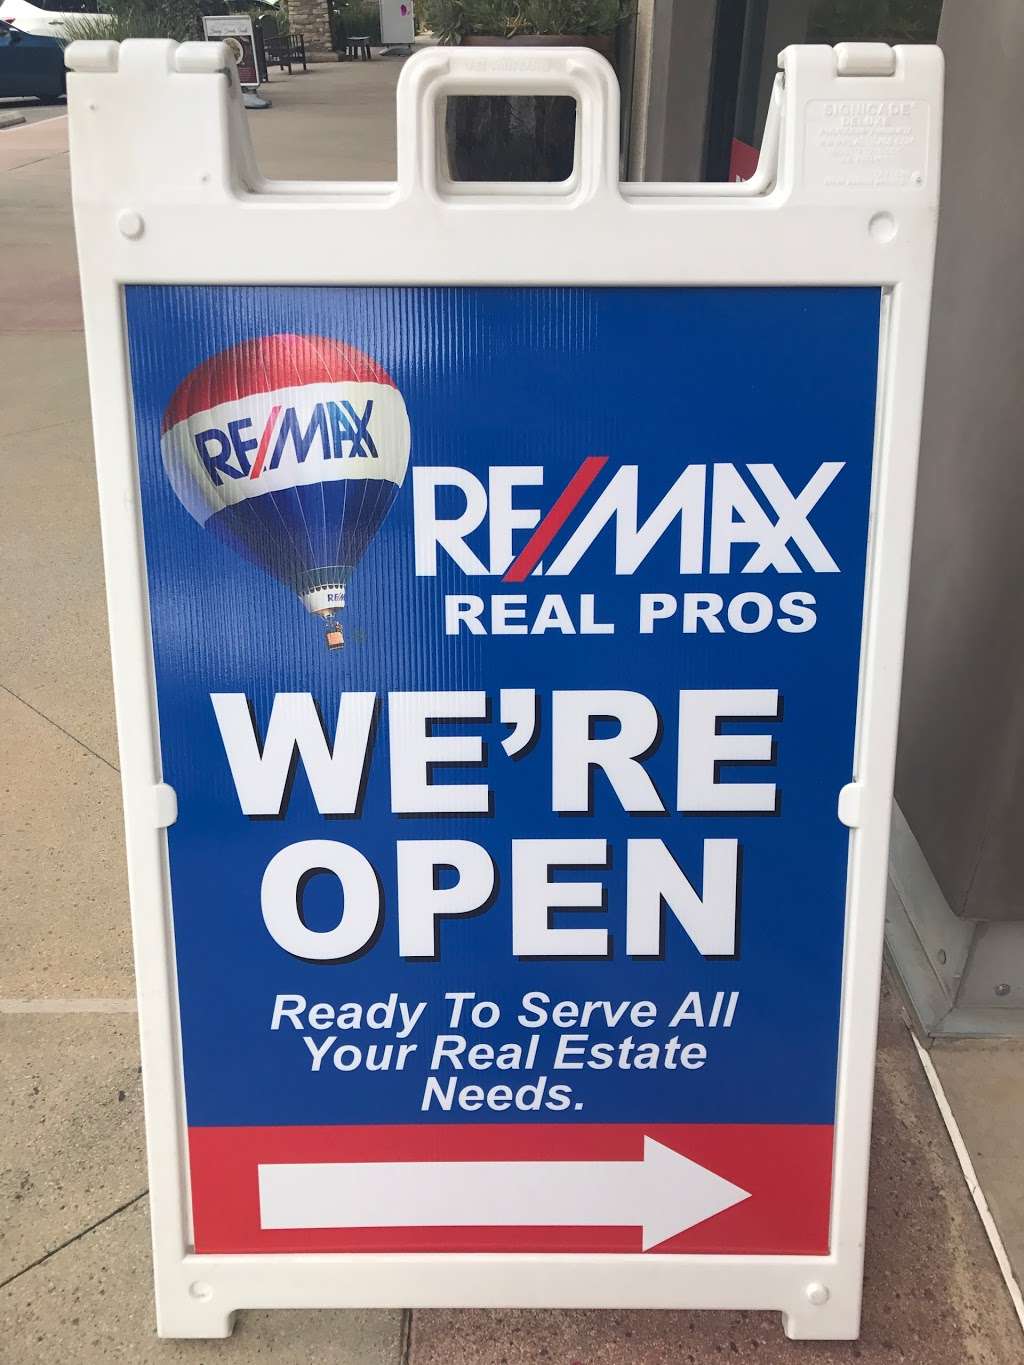 Re/Max Real Pros • DRE 01862588 | 2790 Cabot Dr #4, Corona, CA 92883 | Phone: (951) 735-1700